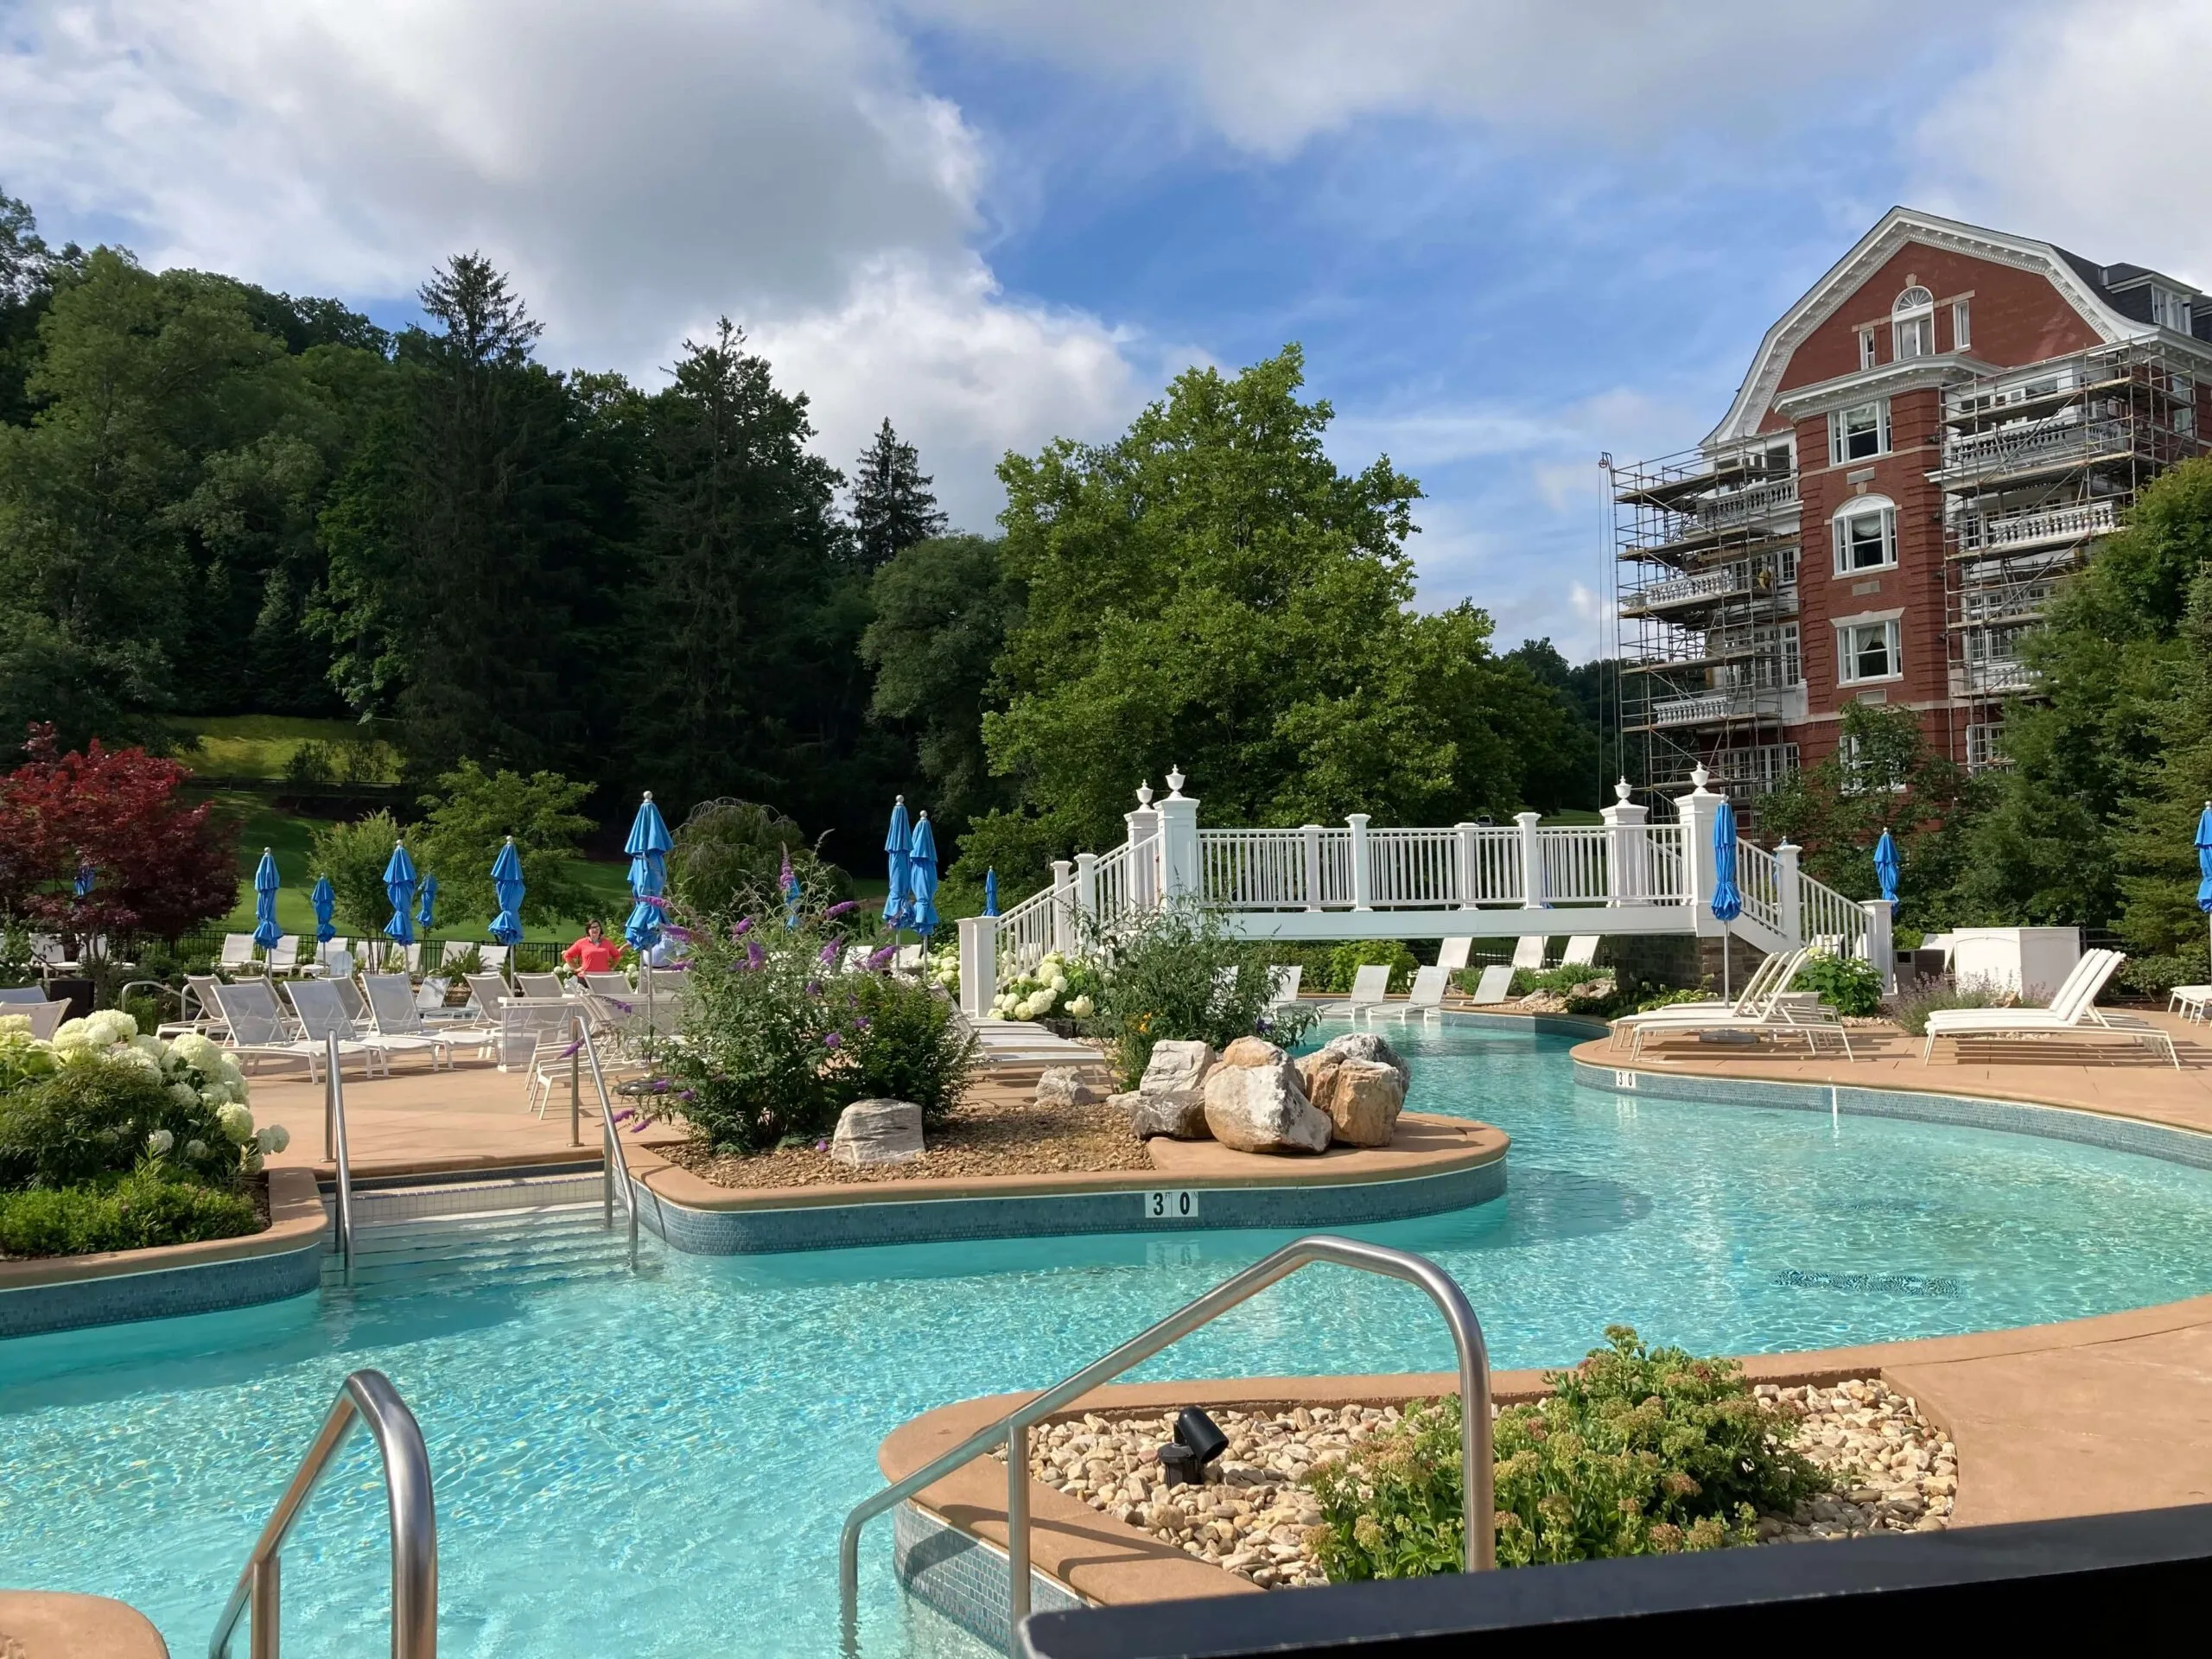 The newly renovated pools next to The Omni Homestead resort building in Hot Springs, Virginia.